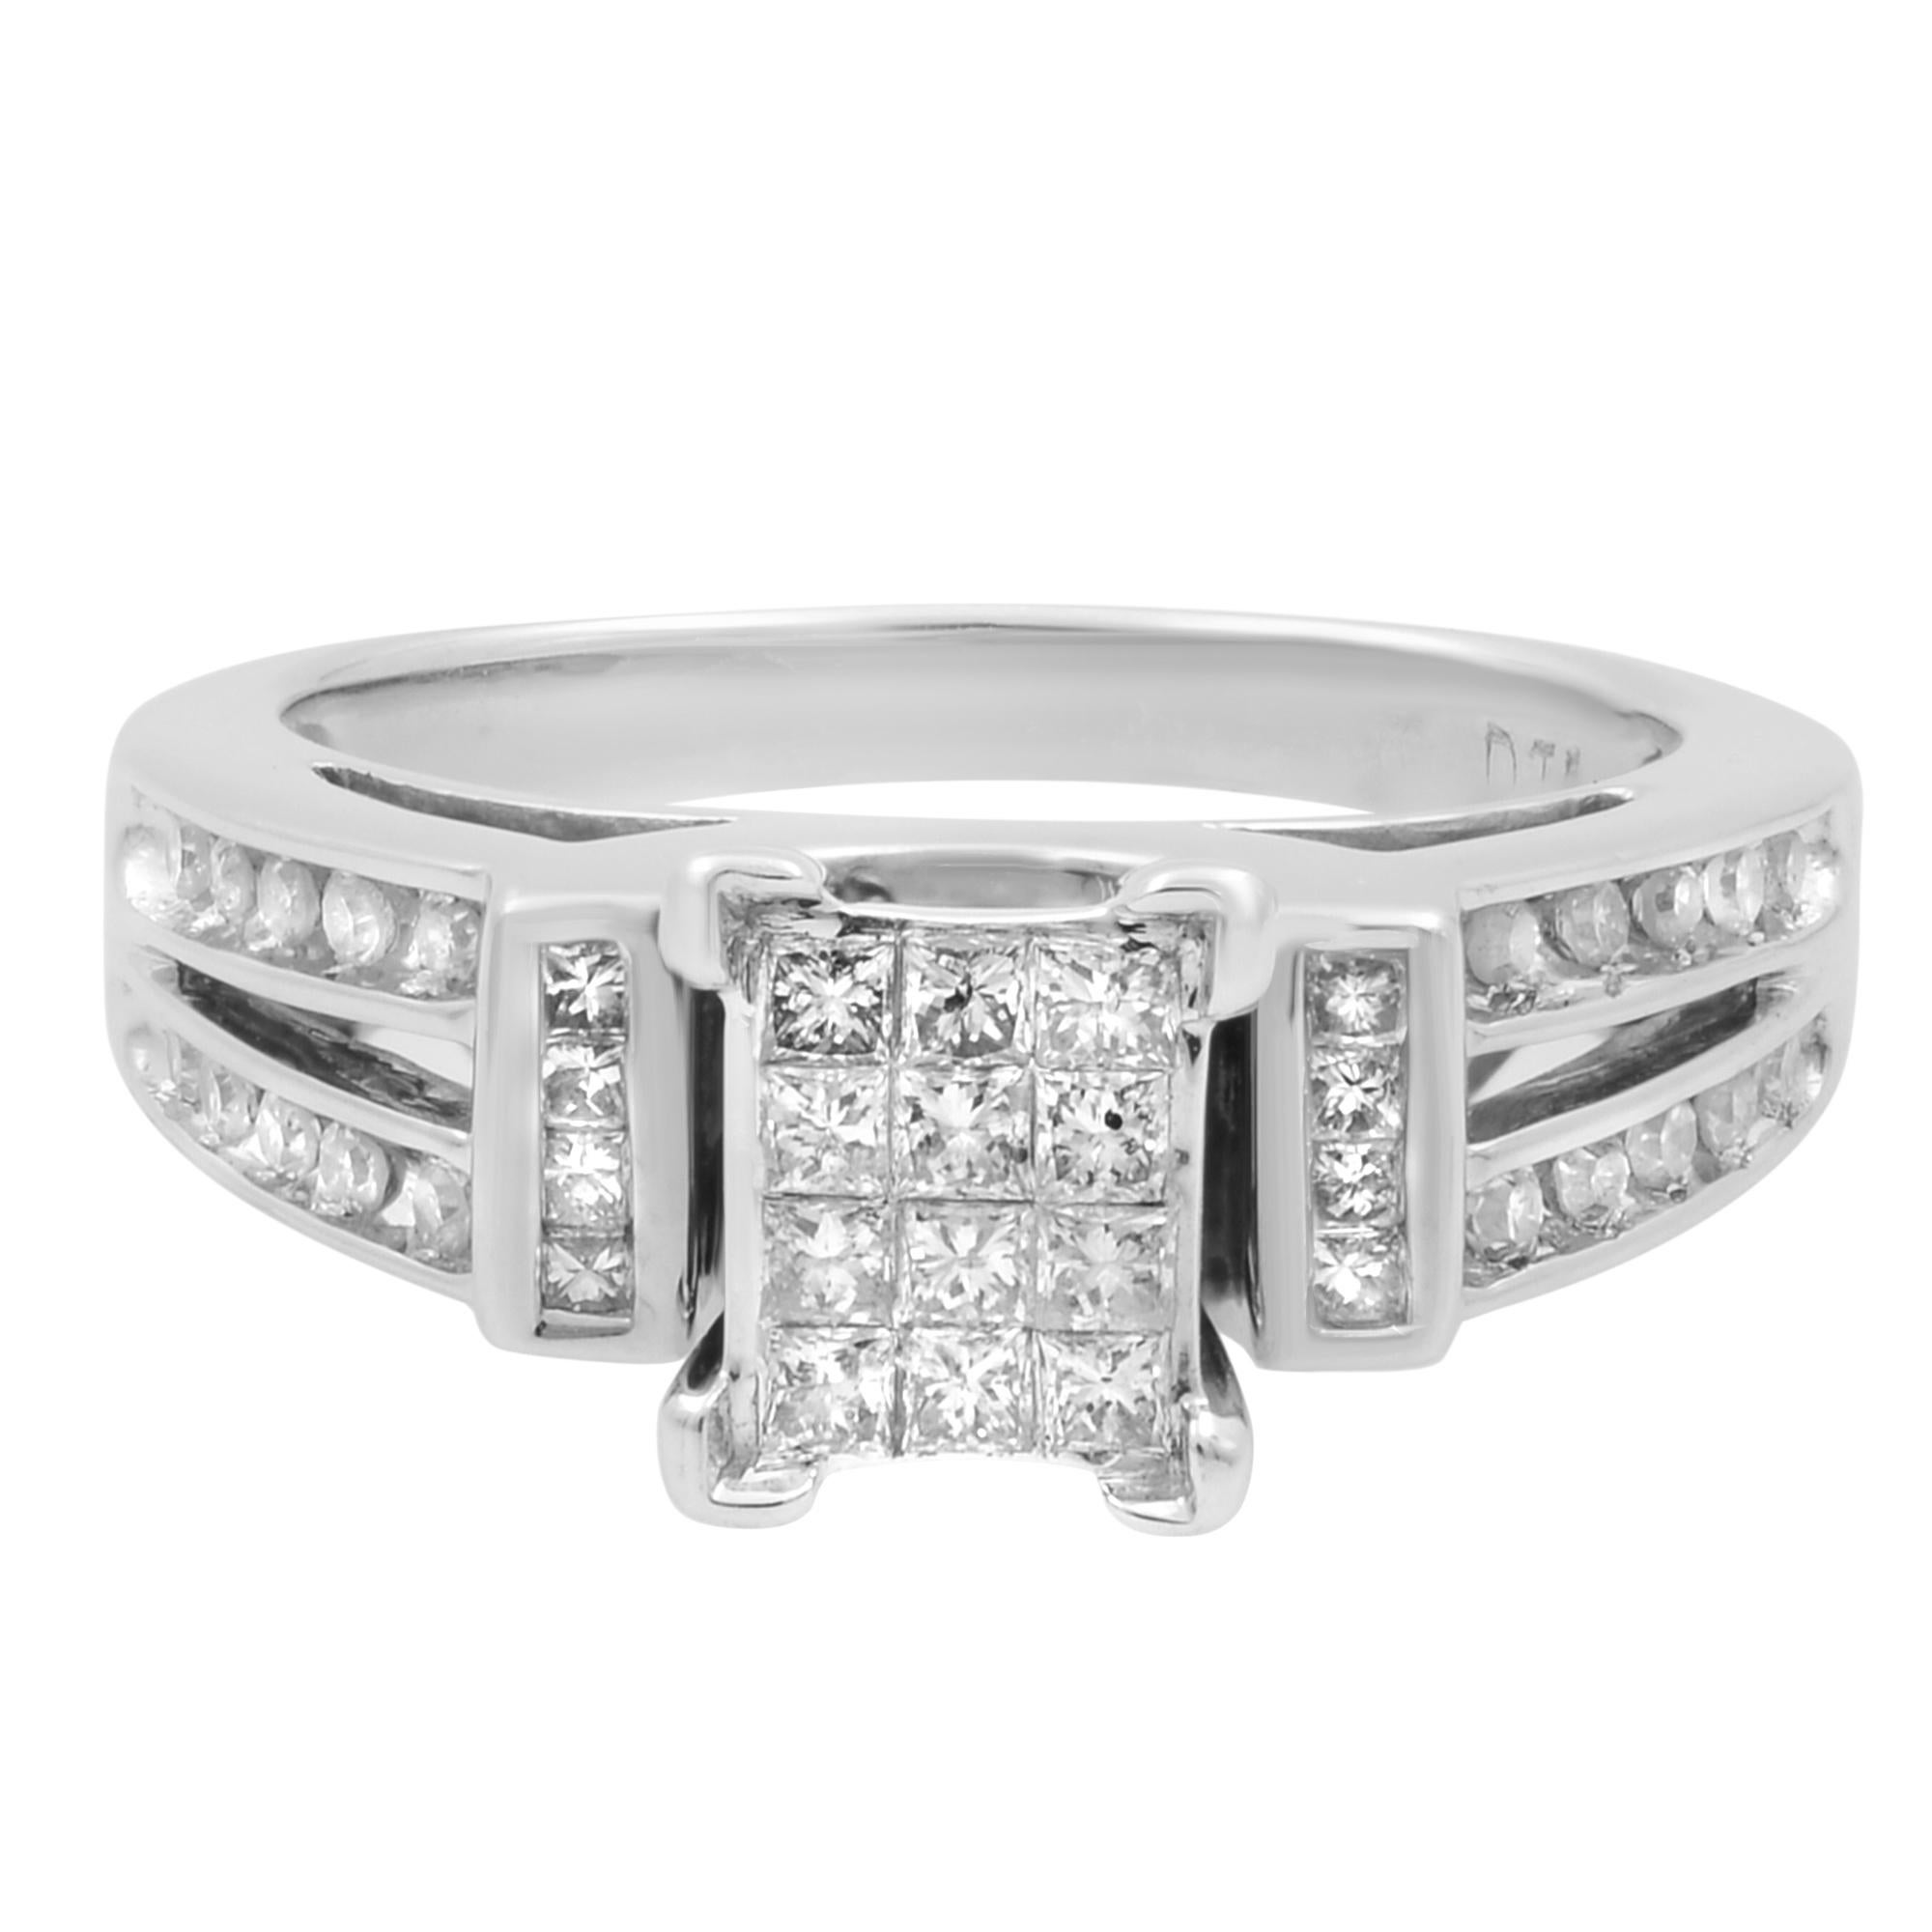 This beautiful engagement ring is crafted in 14k white gold. It features princess cut diamonds encrusted in the center rectangular shank in an invisible setting giving an illusion of a bigger size diamond with round cut diamonds on the ring